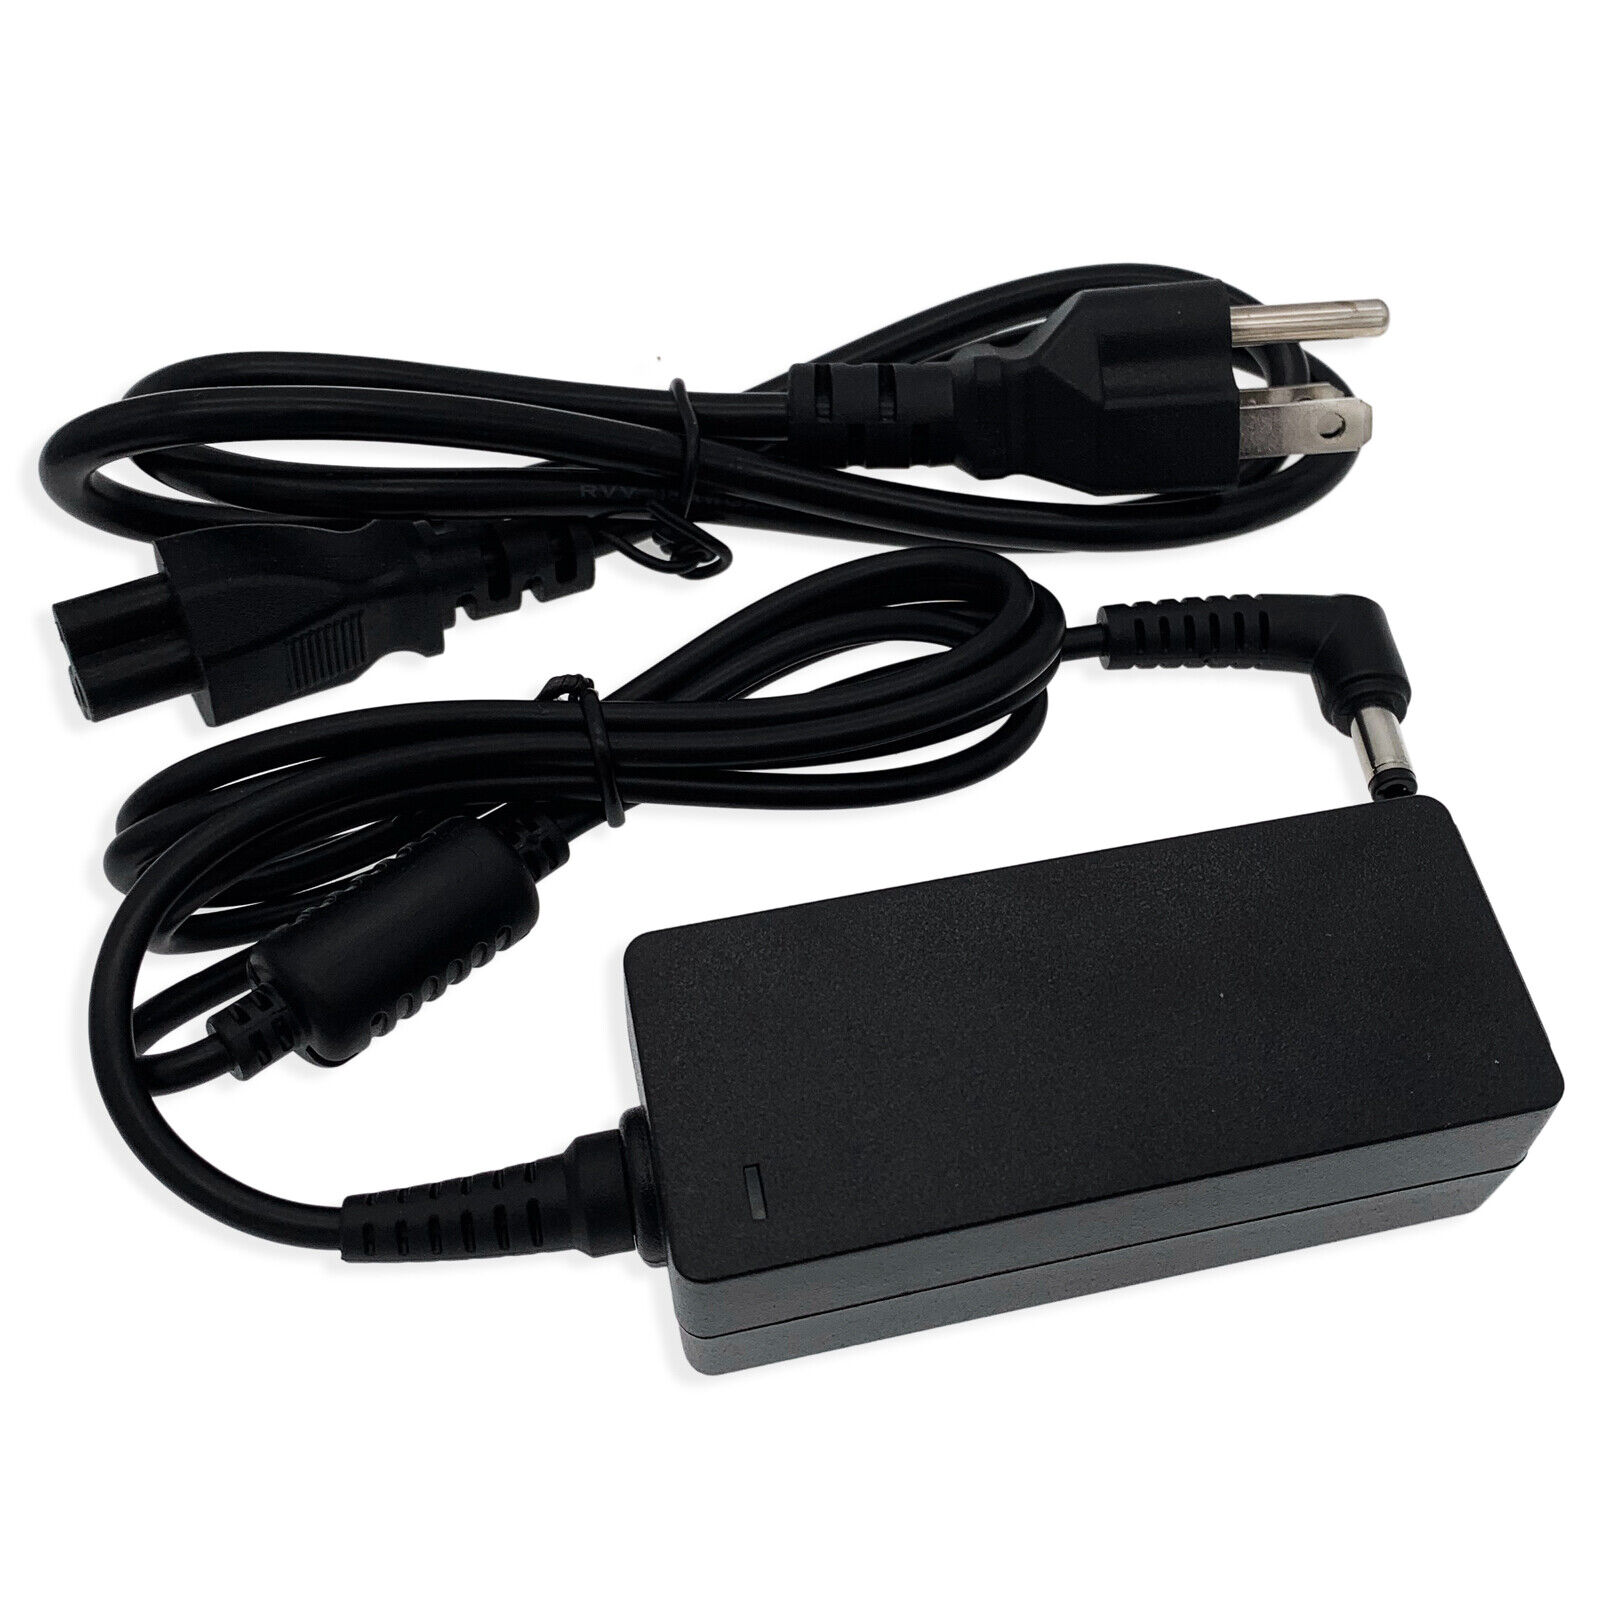 16V AC Adapter For Fujitsu ScanSnap iX500 Scanner PA03656-B005 DC Power Supply Compatible Brand For Fujitsu Power Supp